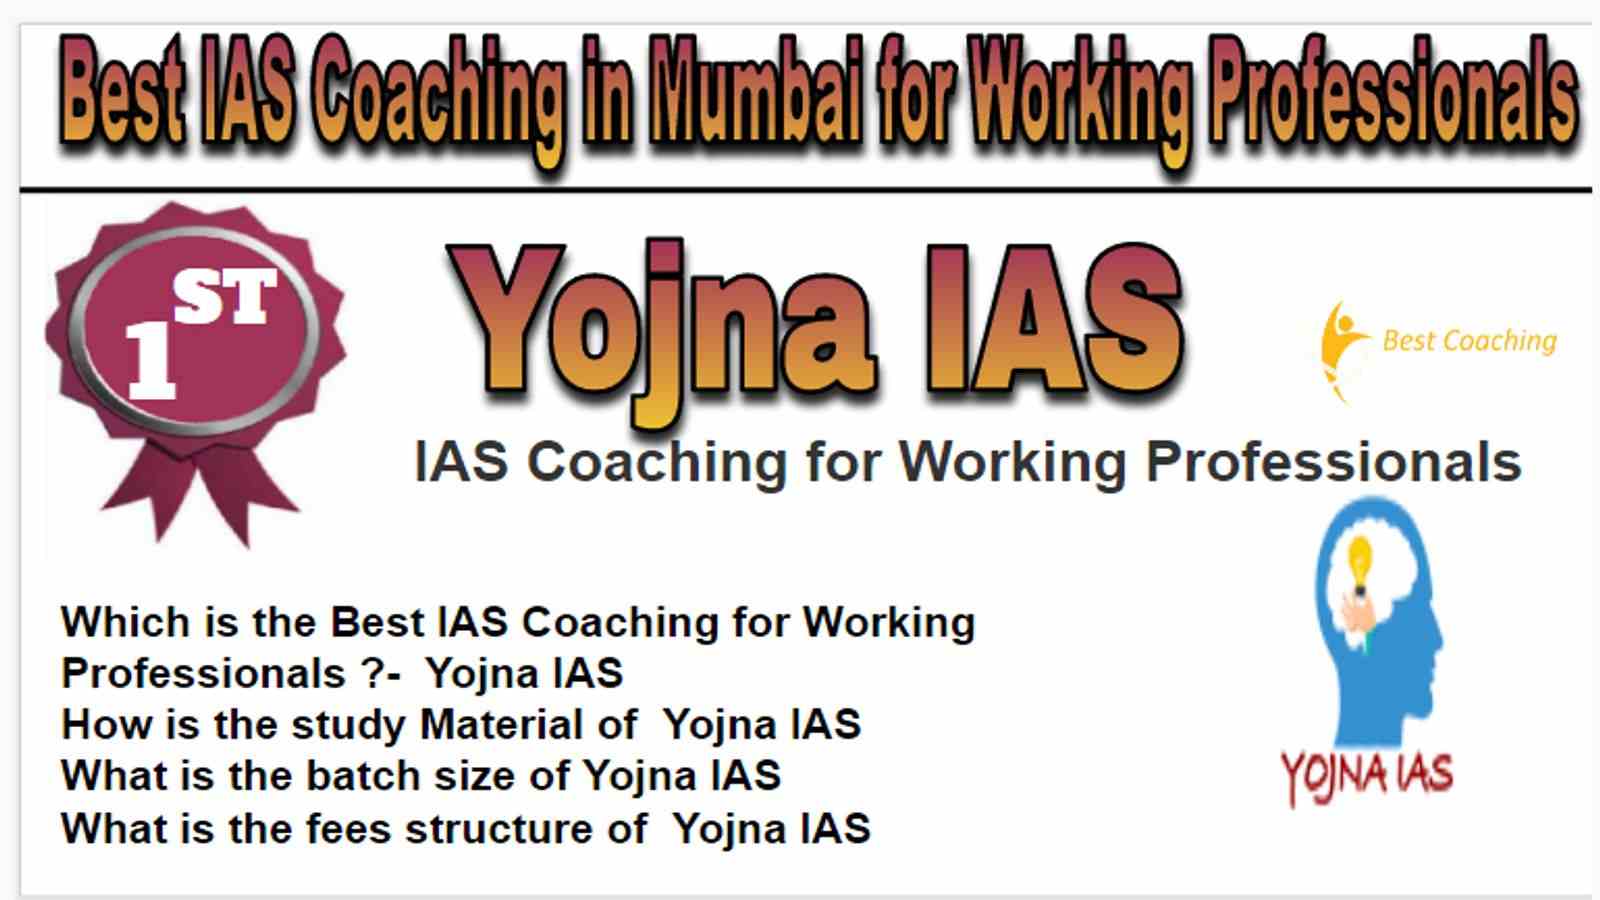 Rank 1 Best IAS Coaching in Mumbai for Working Professionals